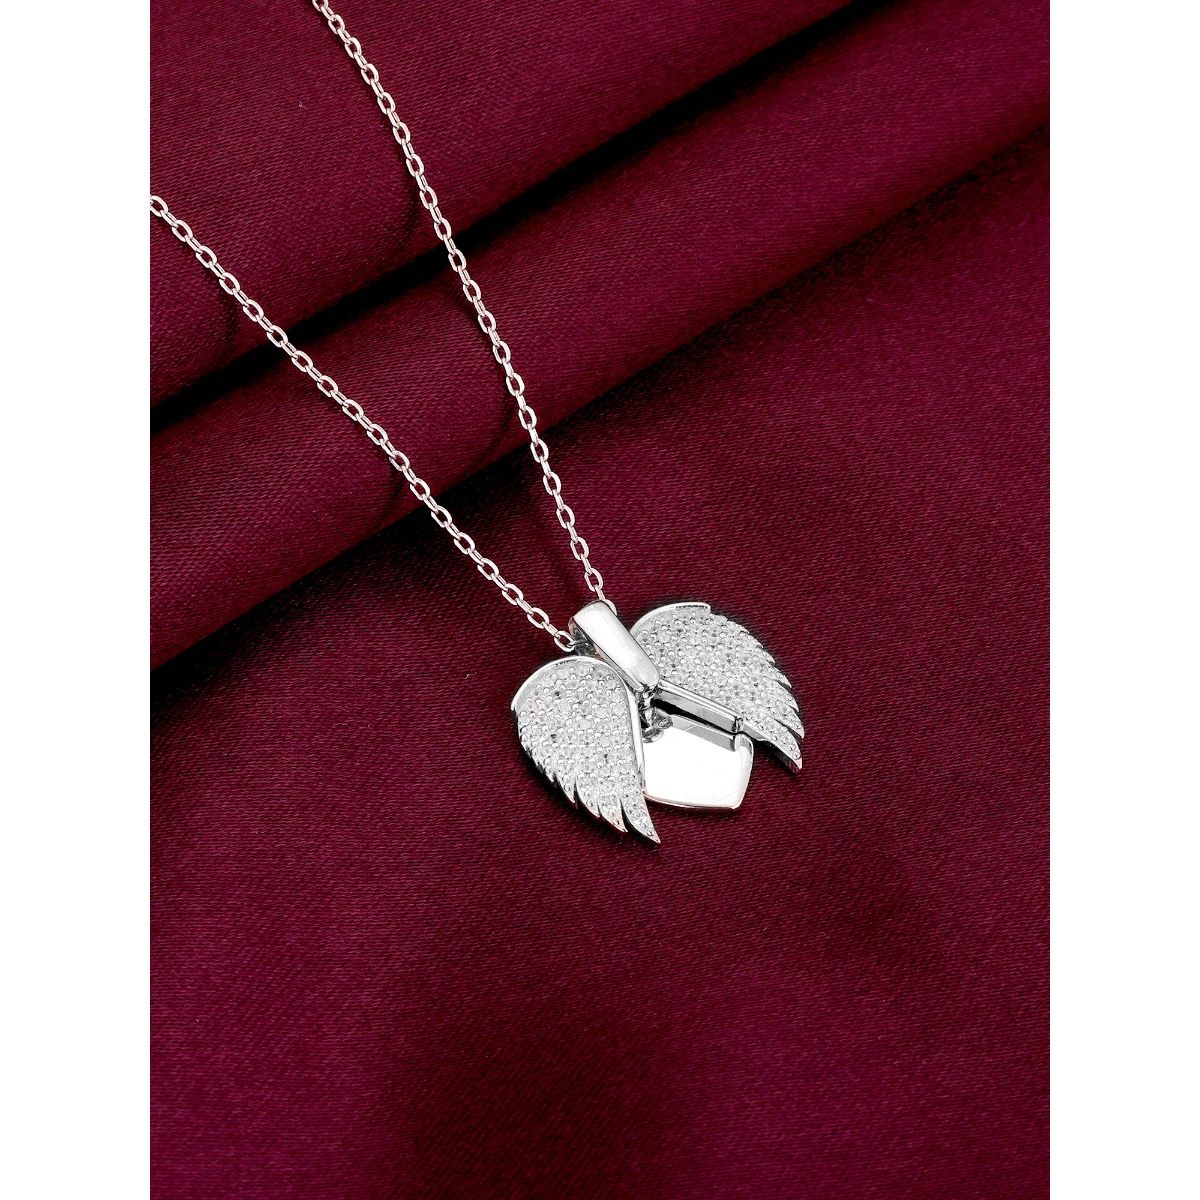 Equilibrium Silver Plated Angel Wings SOLID Heart Necklace Pendant